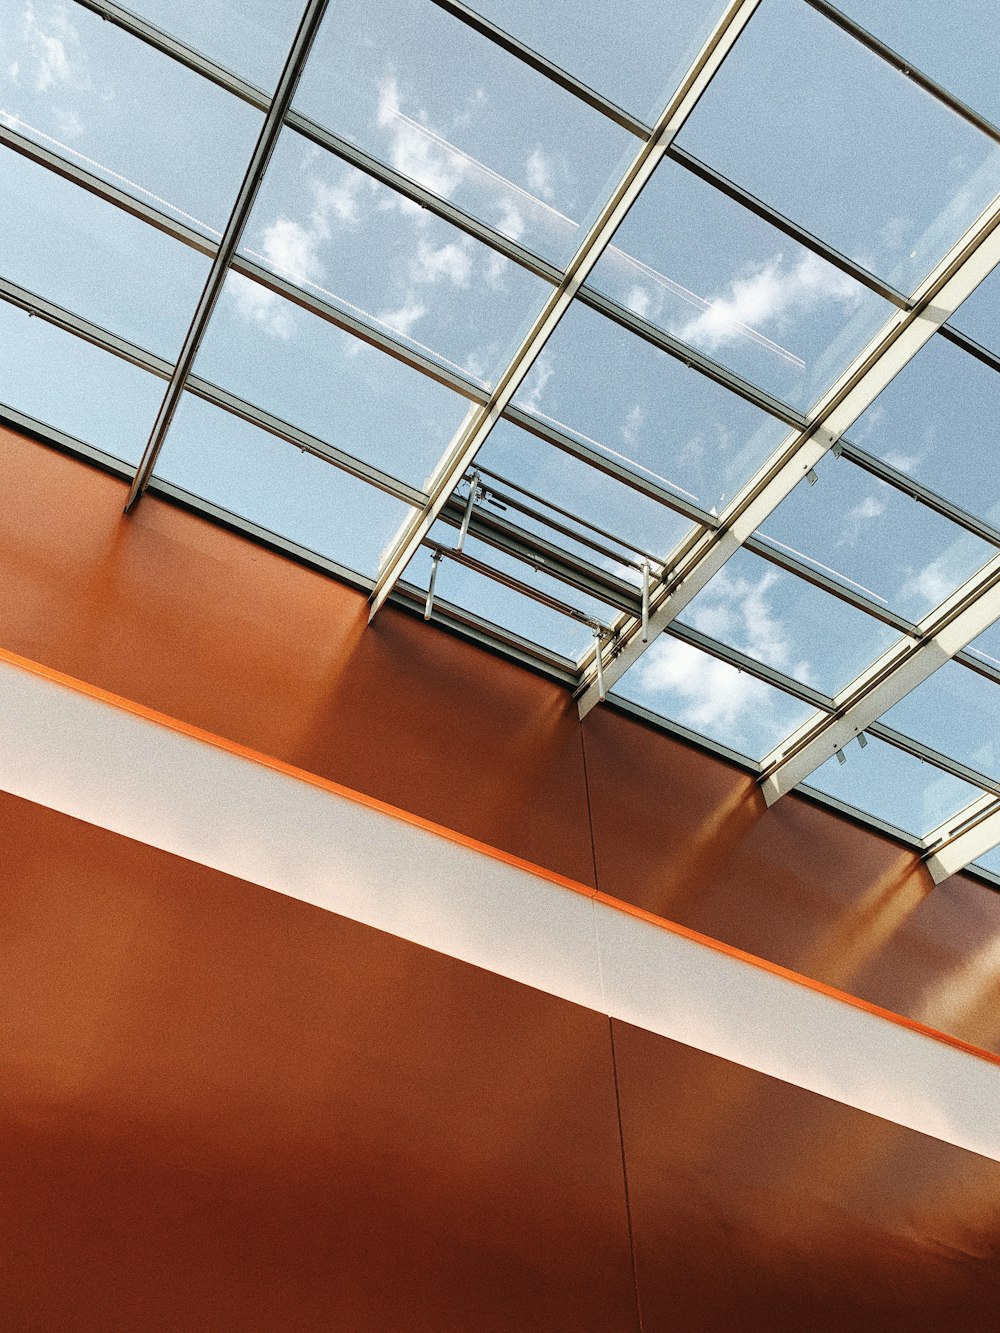 glass ceiling building during daytime close-up photography